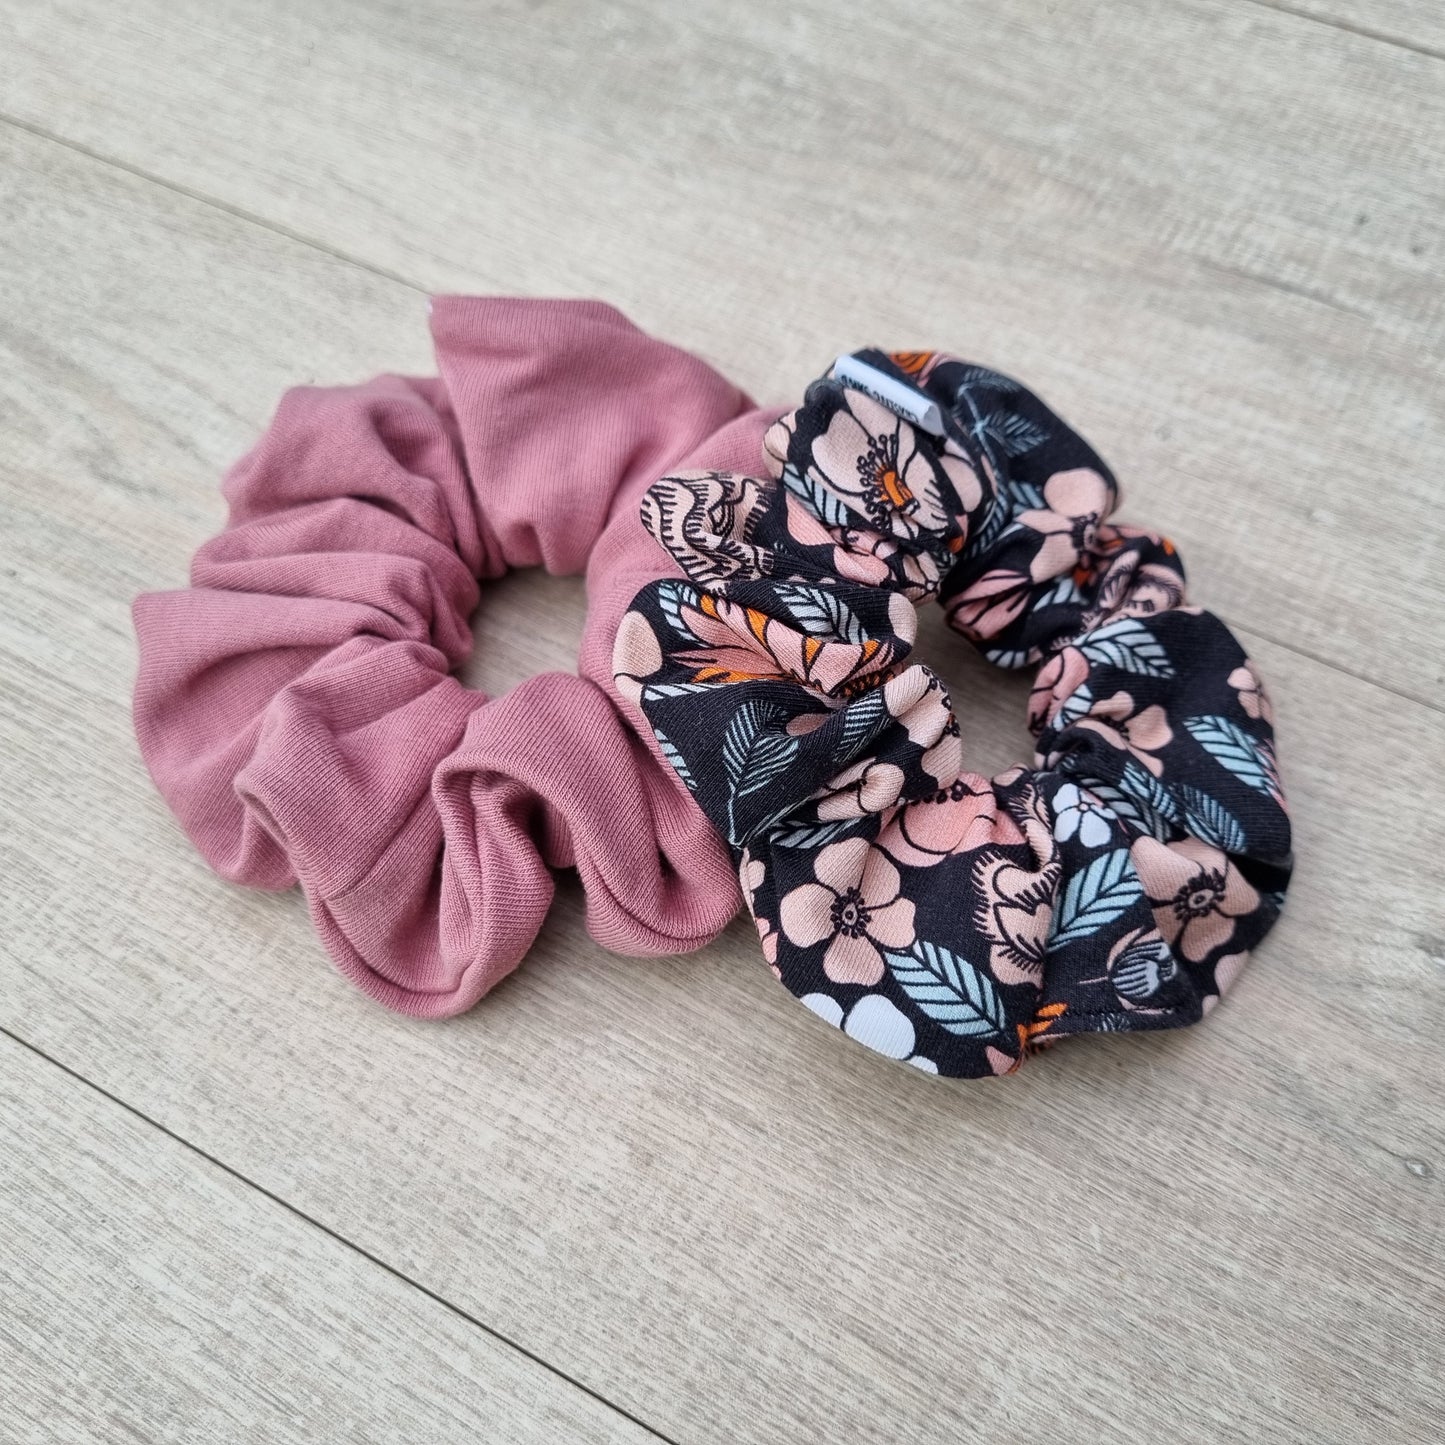 Scrunchie - Florence against wooden backdrop. Orange and pink flowers with leaves on black background.